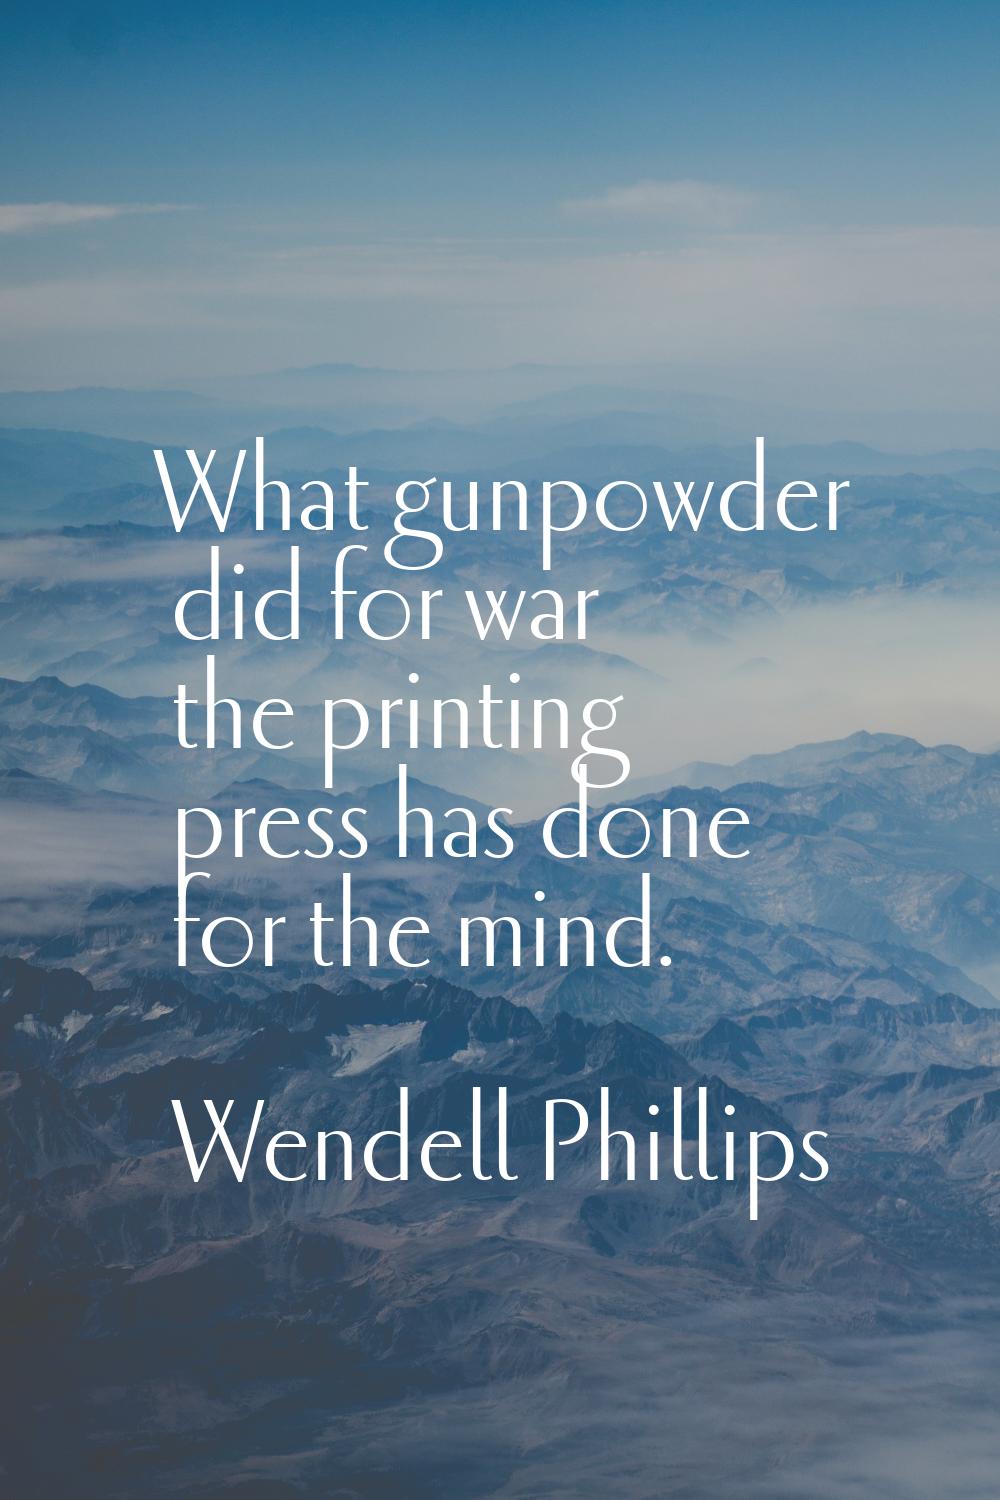 What gunpowder did for war the printing press has done for the mind.